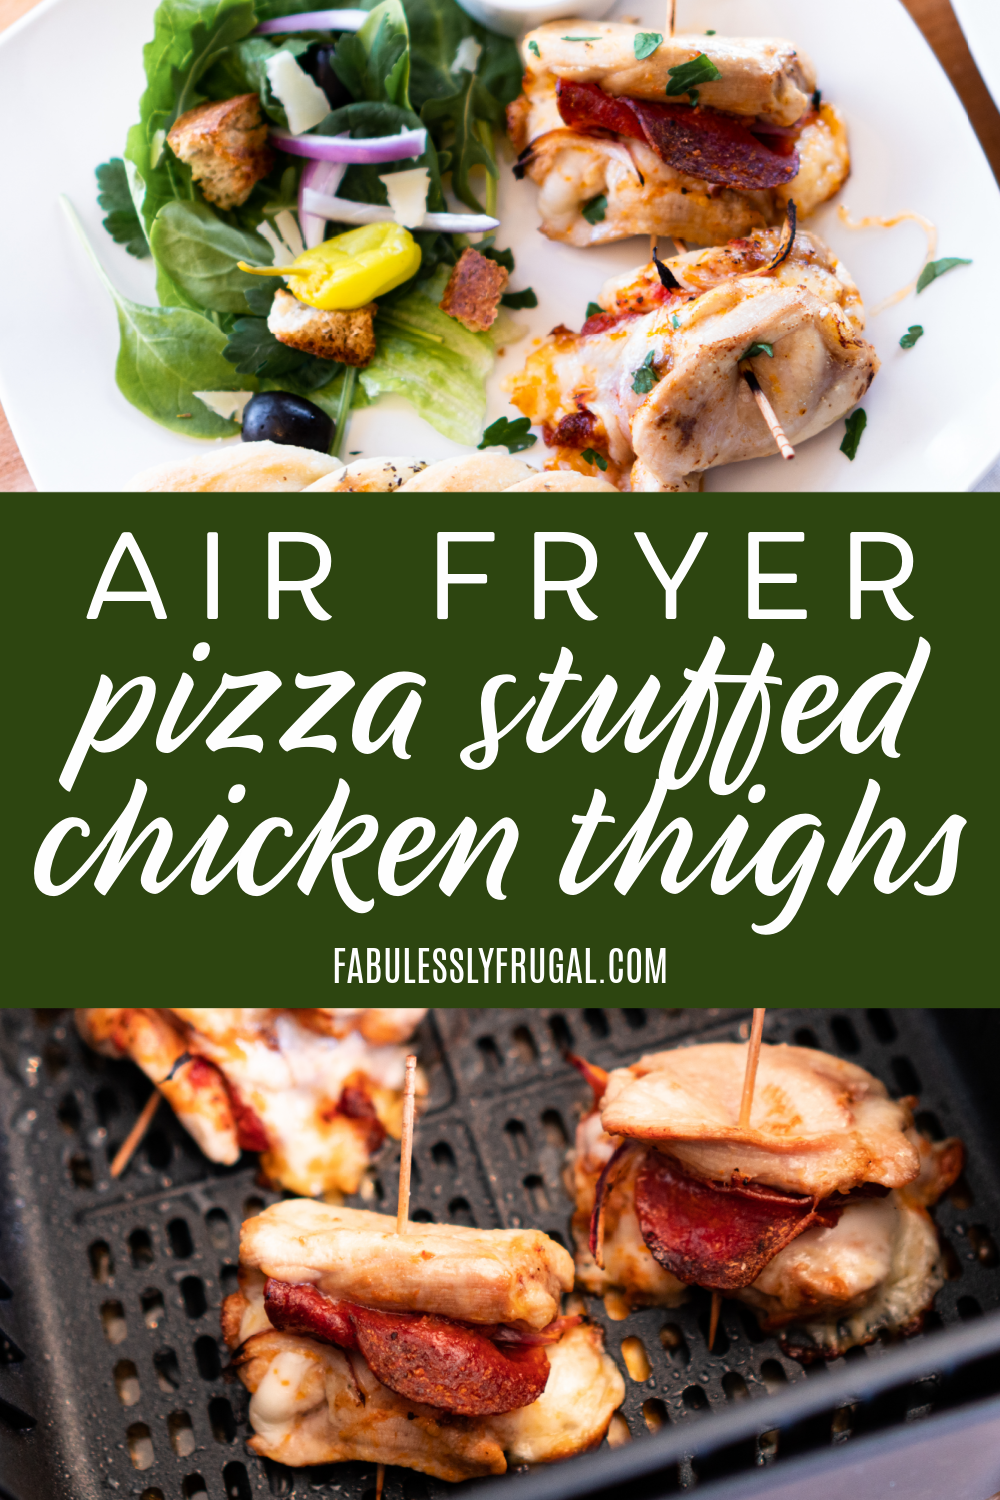 This air fryer pizza stuffed chicken thighs recipe is the best recipe for a fun and healthy way to feed a crowd!